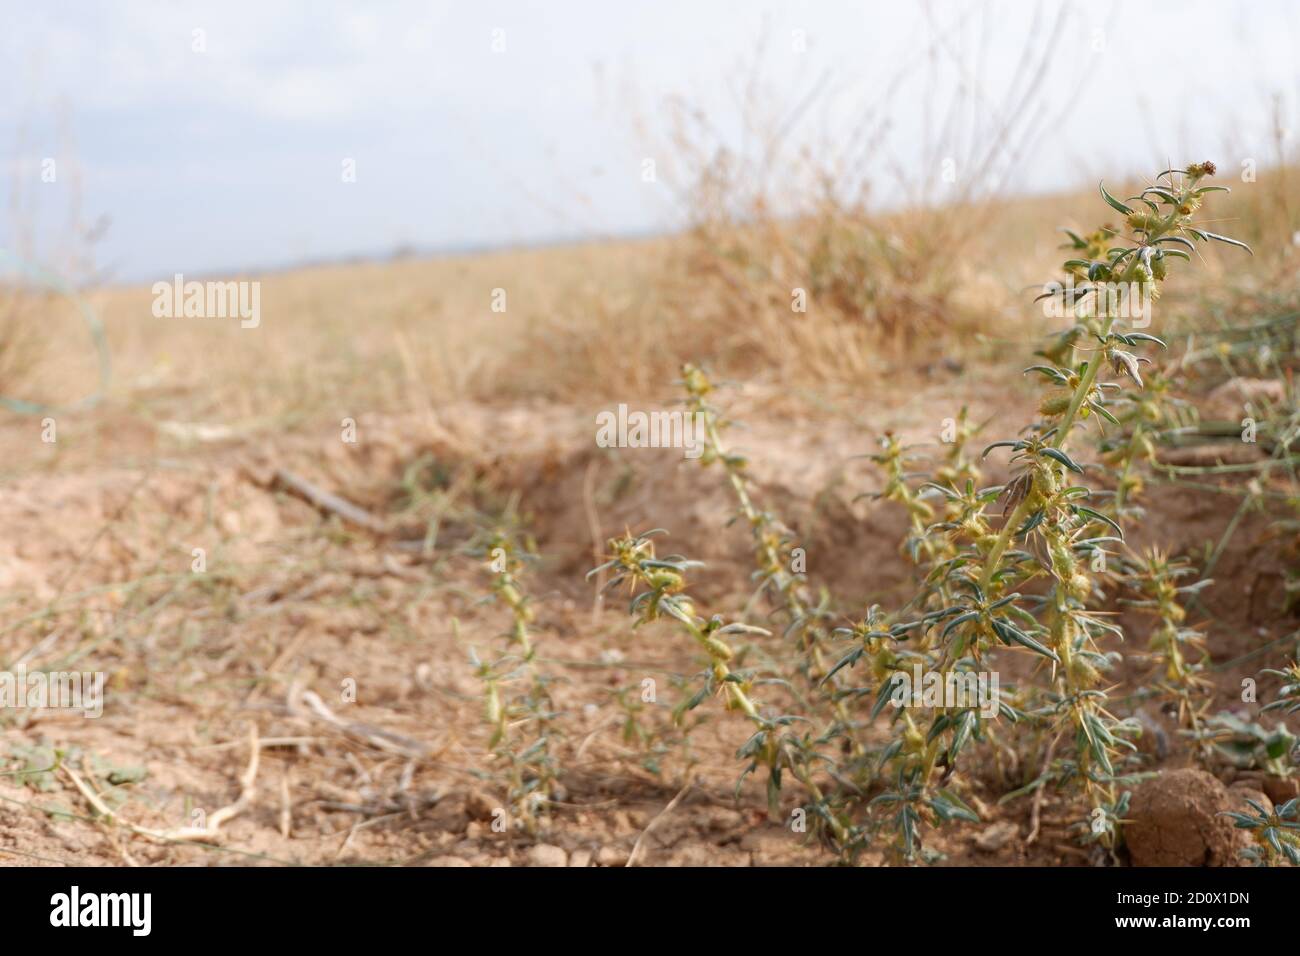 Thorns in the barren land Stock Photo